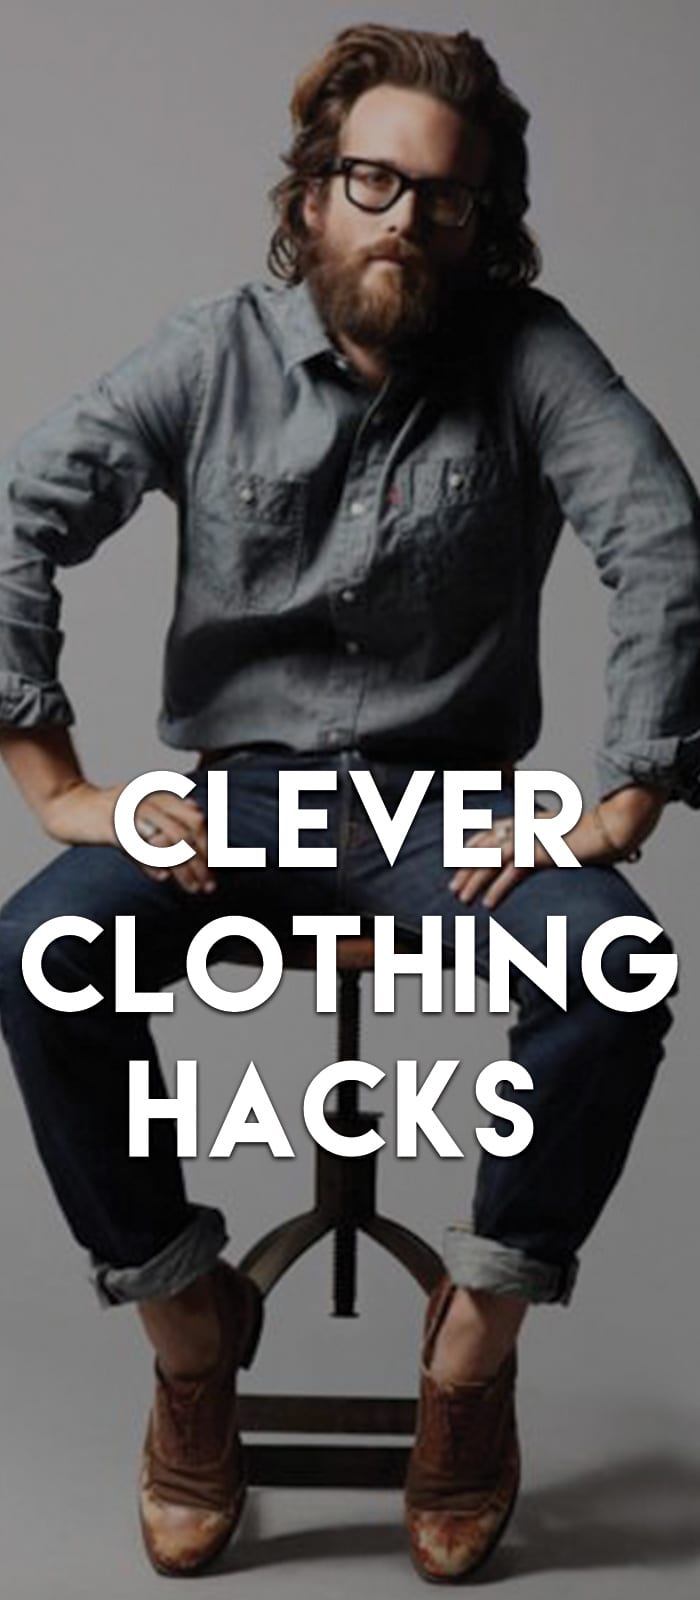 Clever-Clothing-Hacks